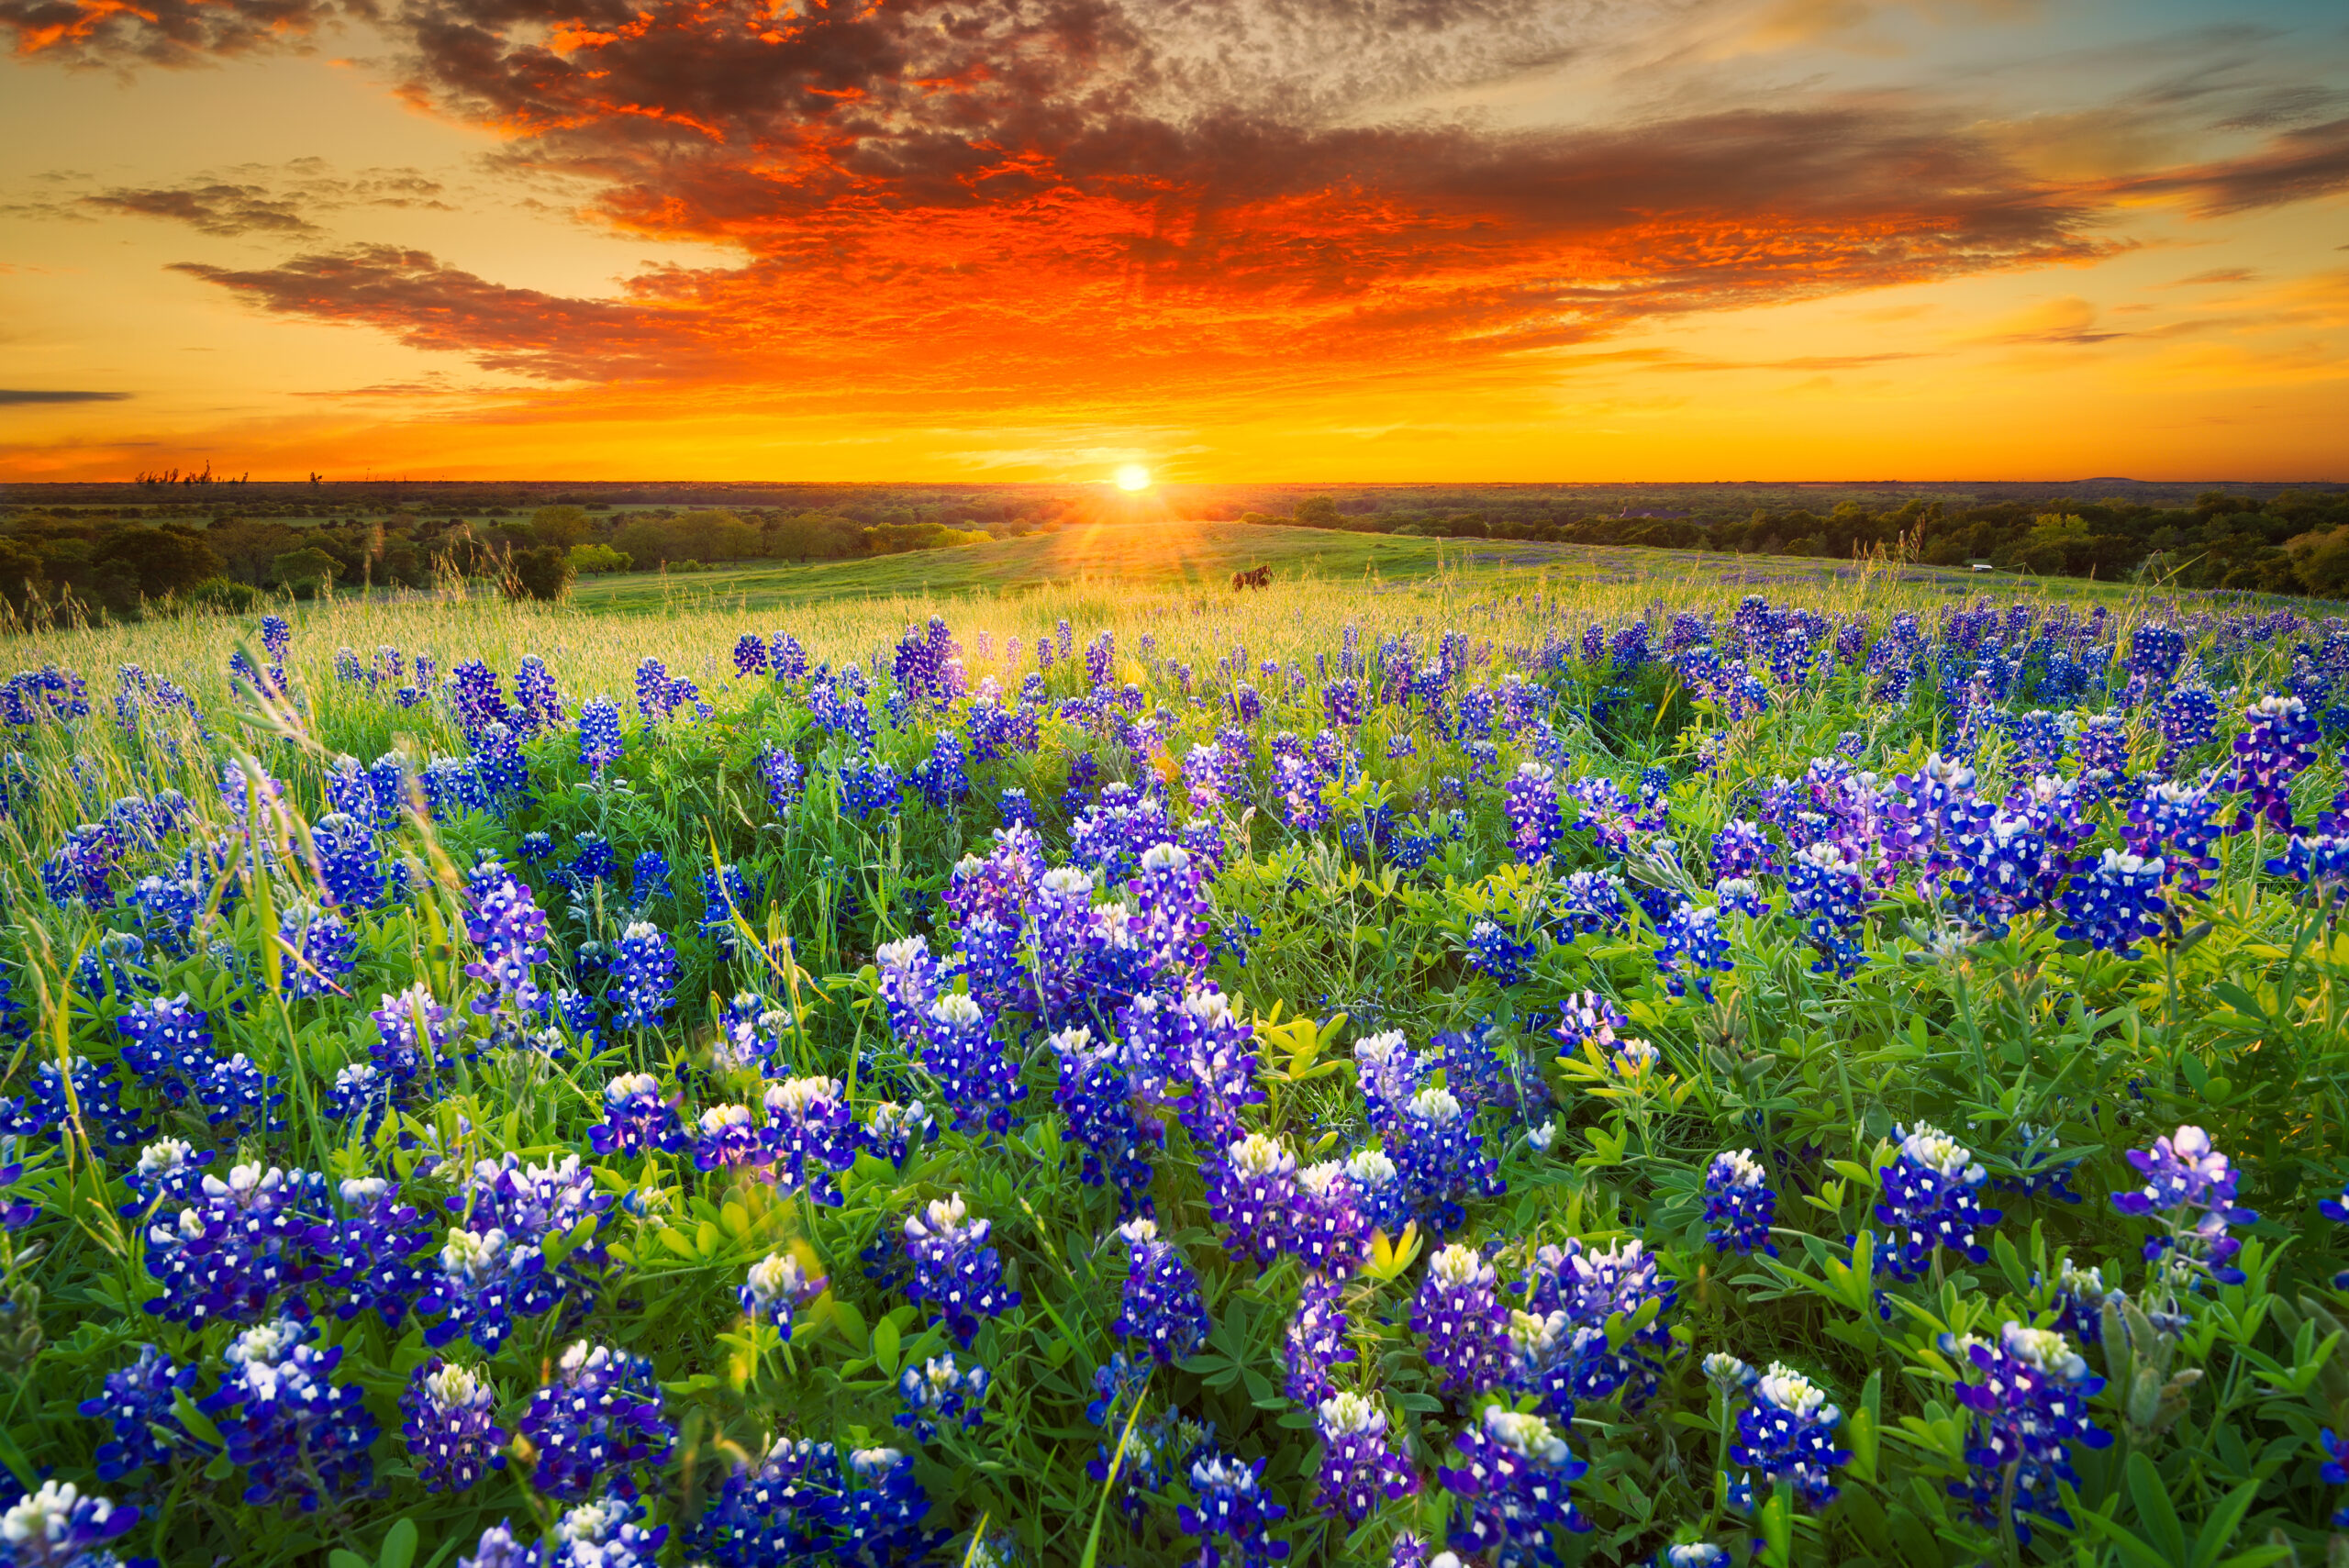 Bluebonnet flowers and sunset